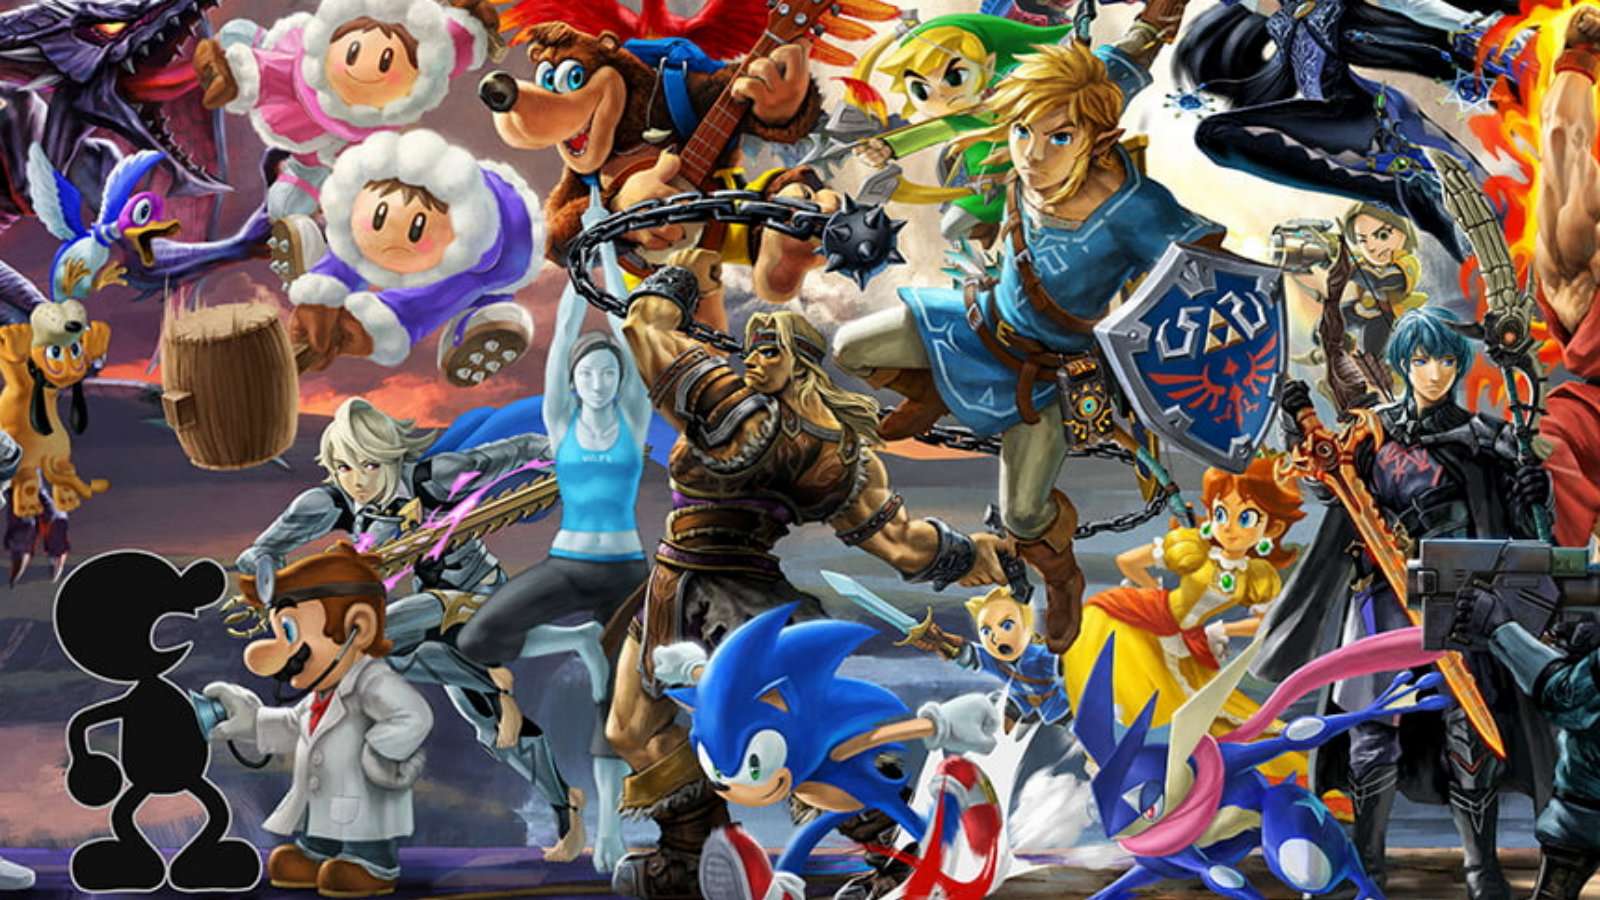 A portion of the famous Smash Ultimate murel featuring Link, Dr Mario, Sonic and Pokemon